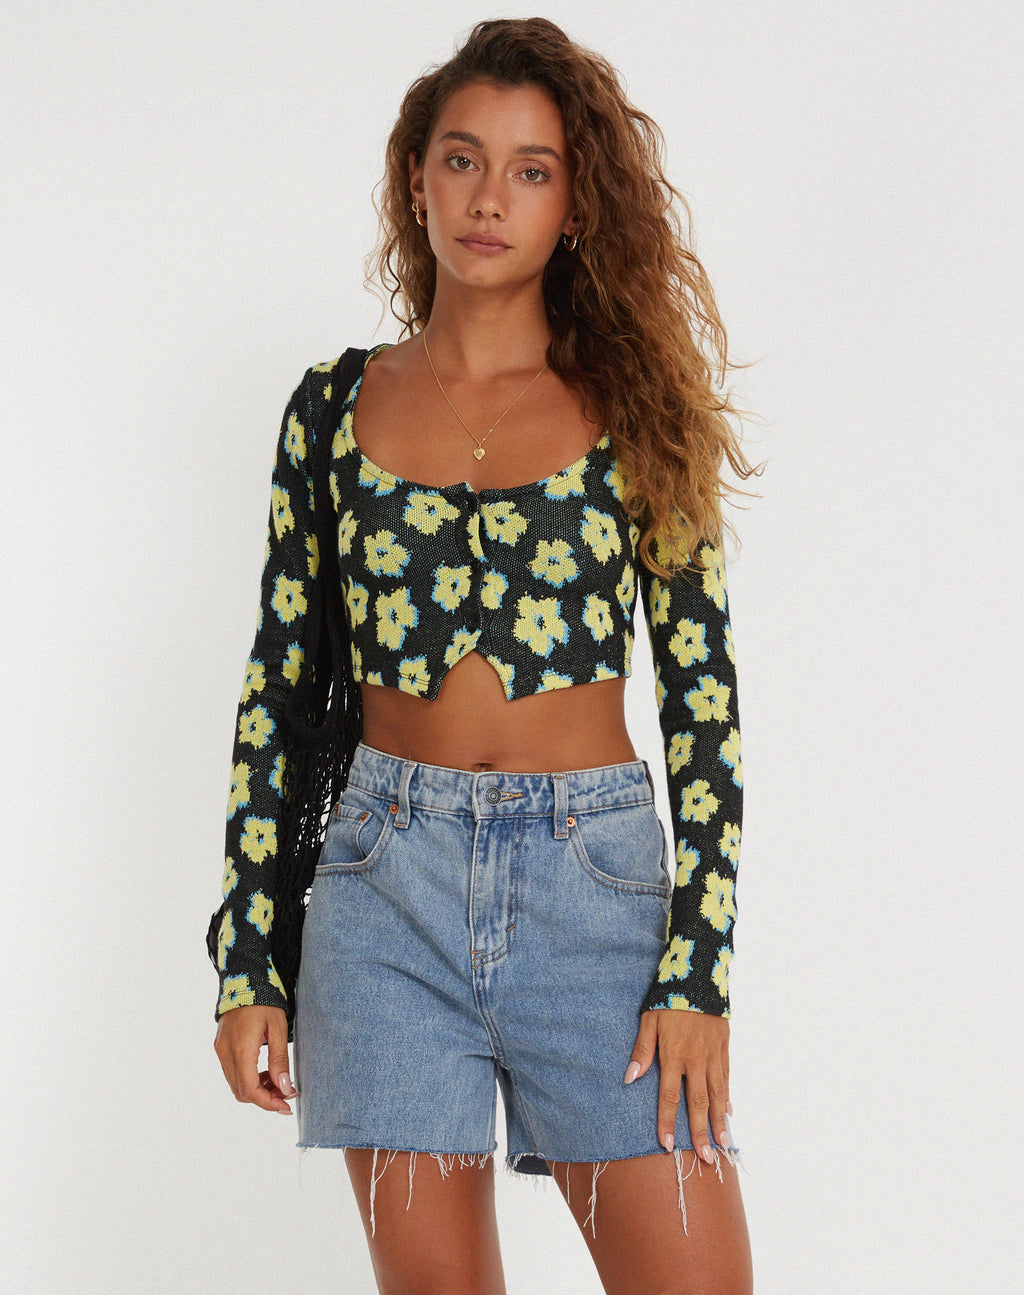 Faline Crop Top in Cute Floral Black and Yellow